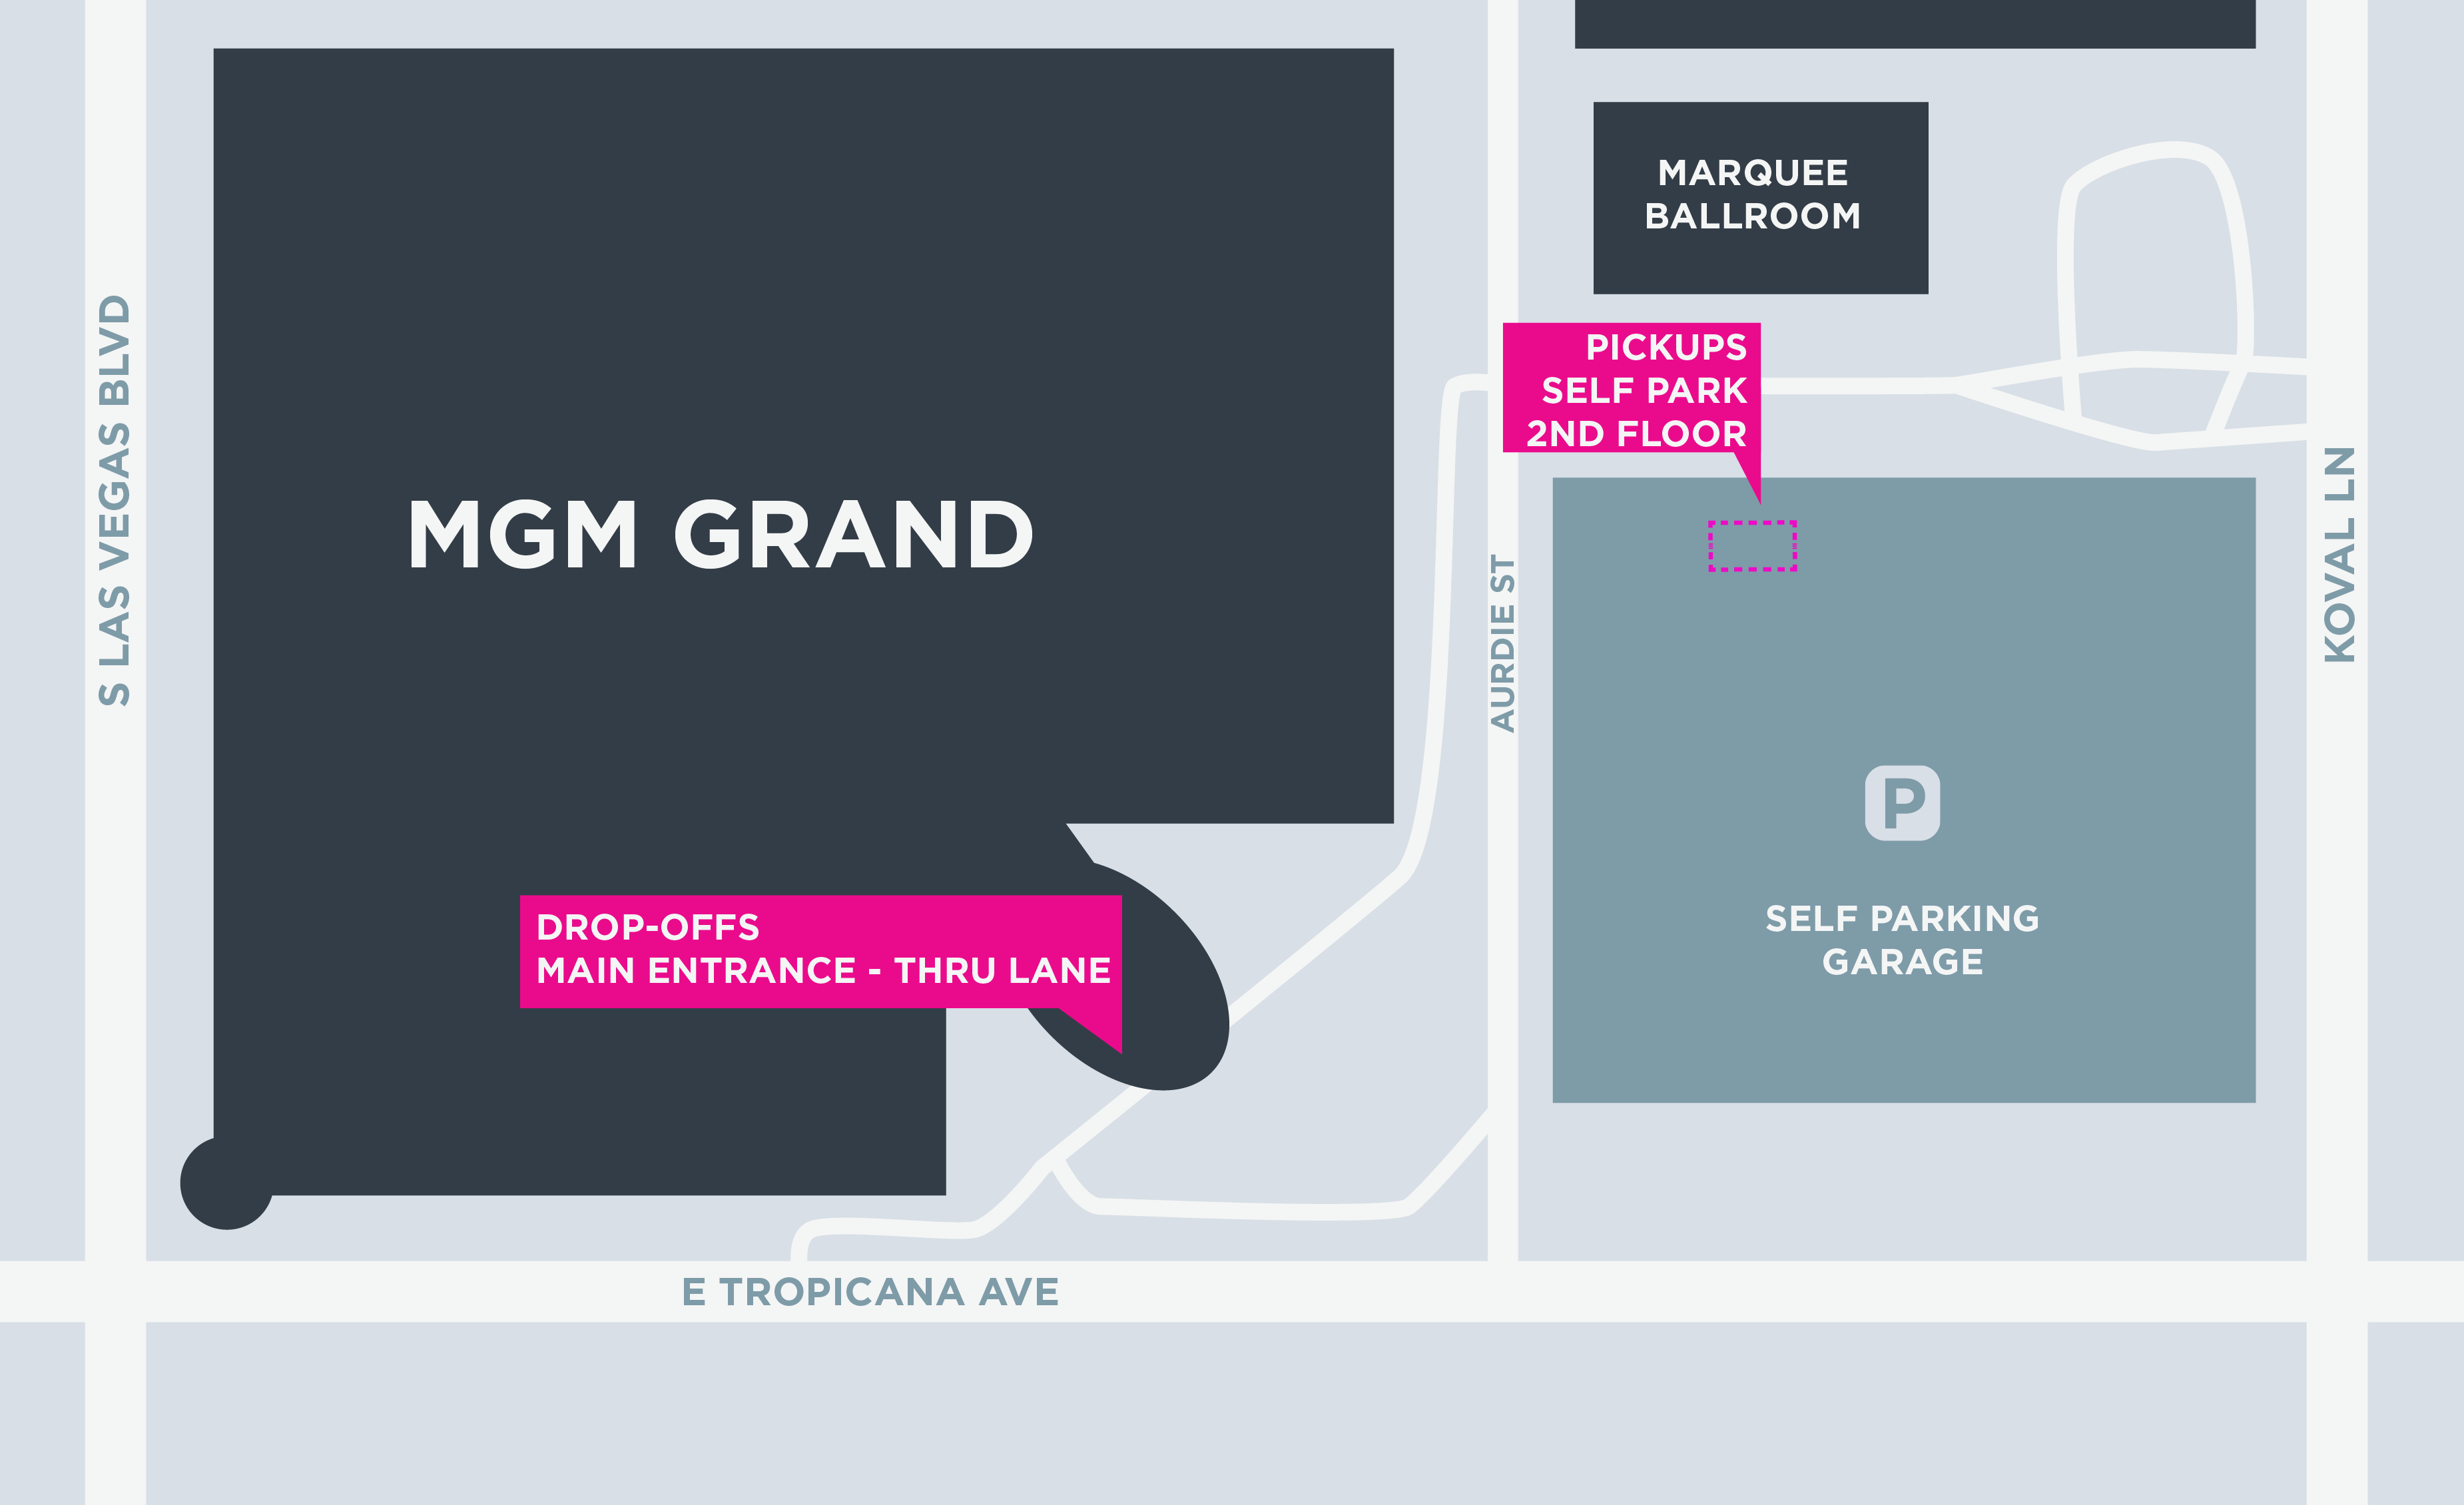 Map of the pickup and drop-off areas at the MGM Grand in Las Vegas.